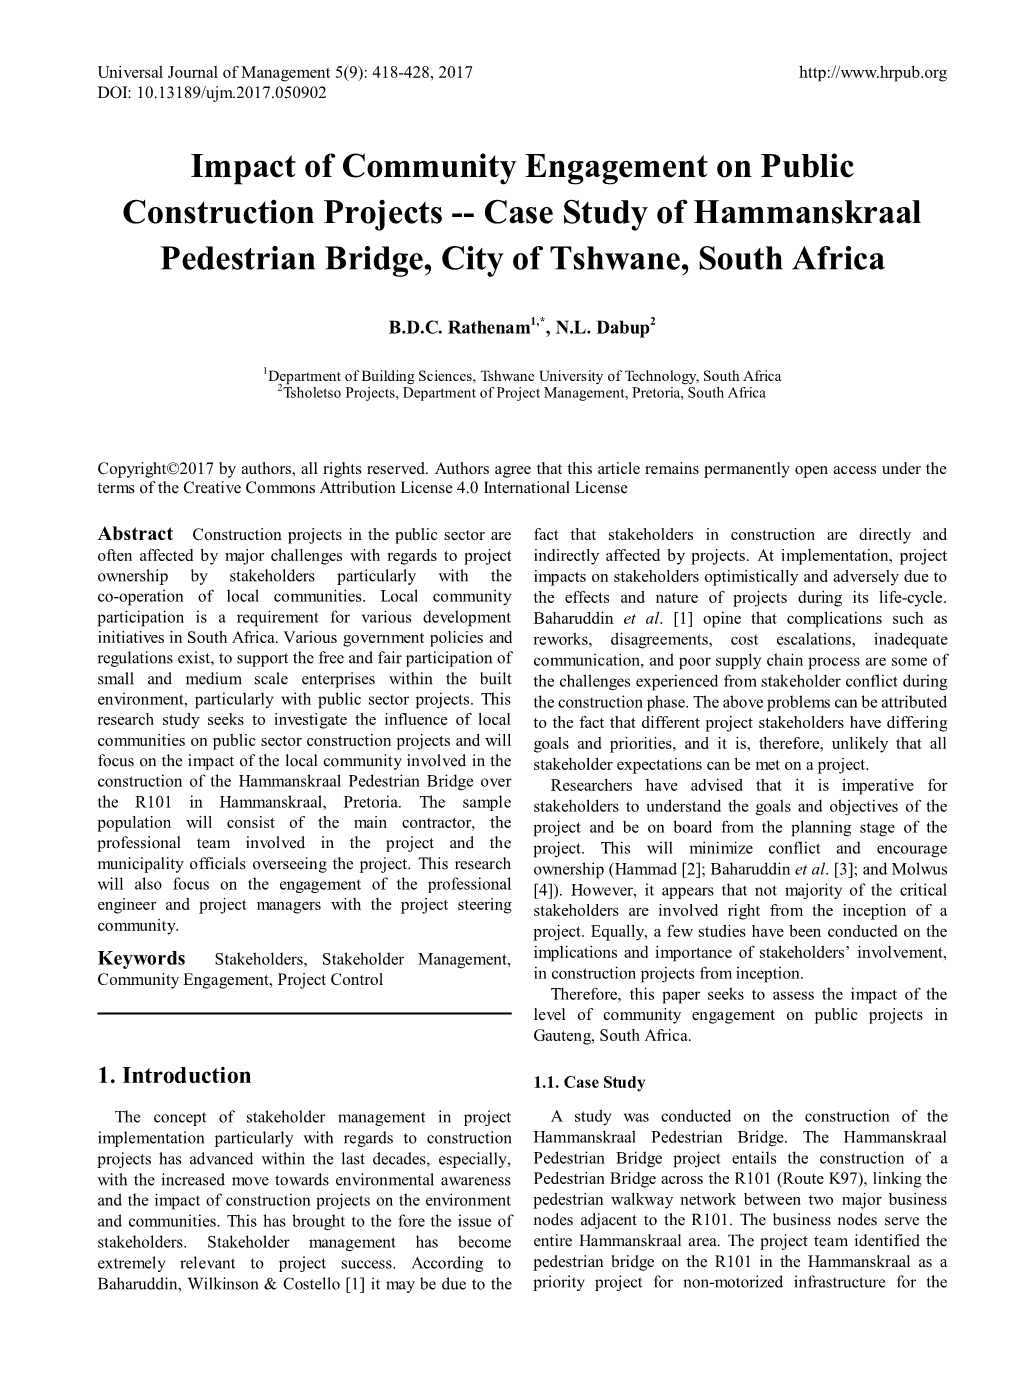 Impact of Community Engagement on Public Construction Projects -- Case Study of Hammanskraal Pedestrian Bridge, City of Tshwane, South Africa